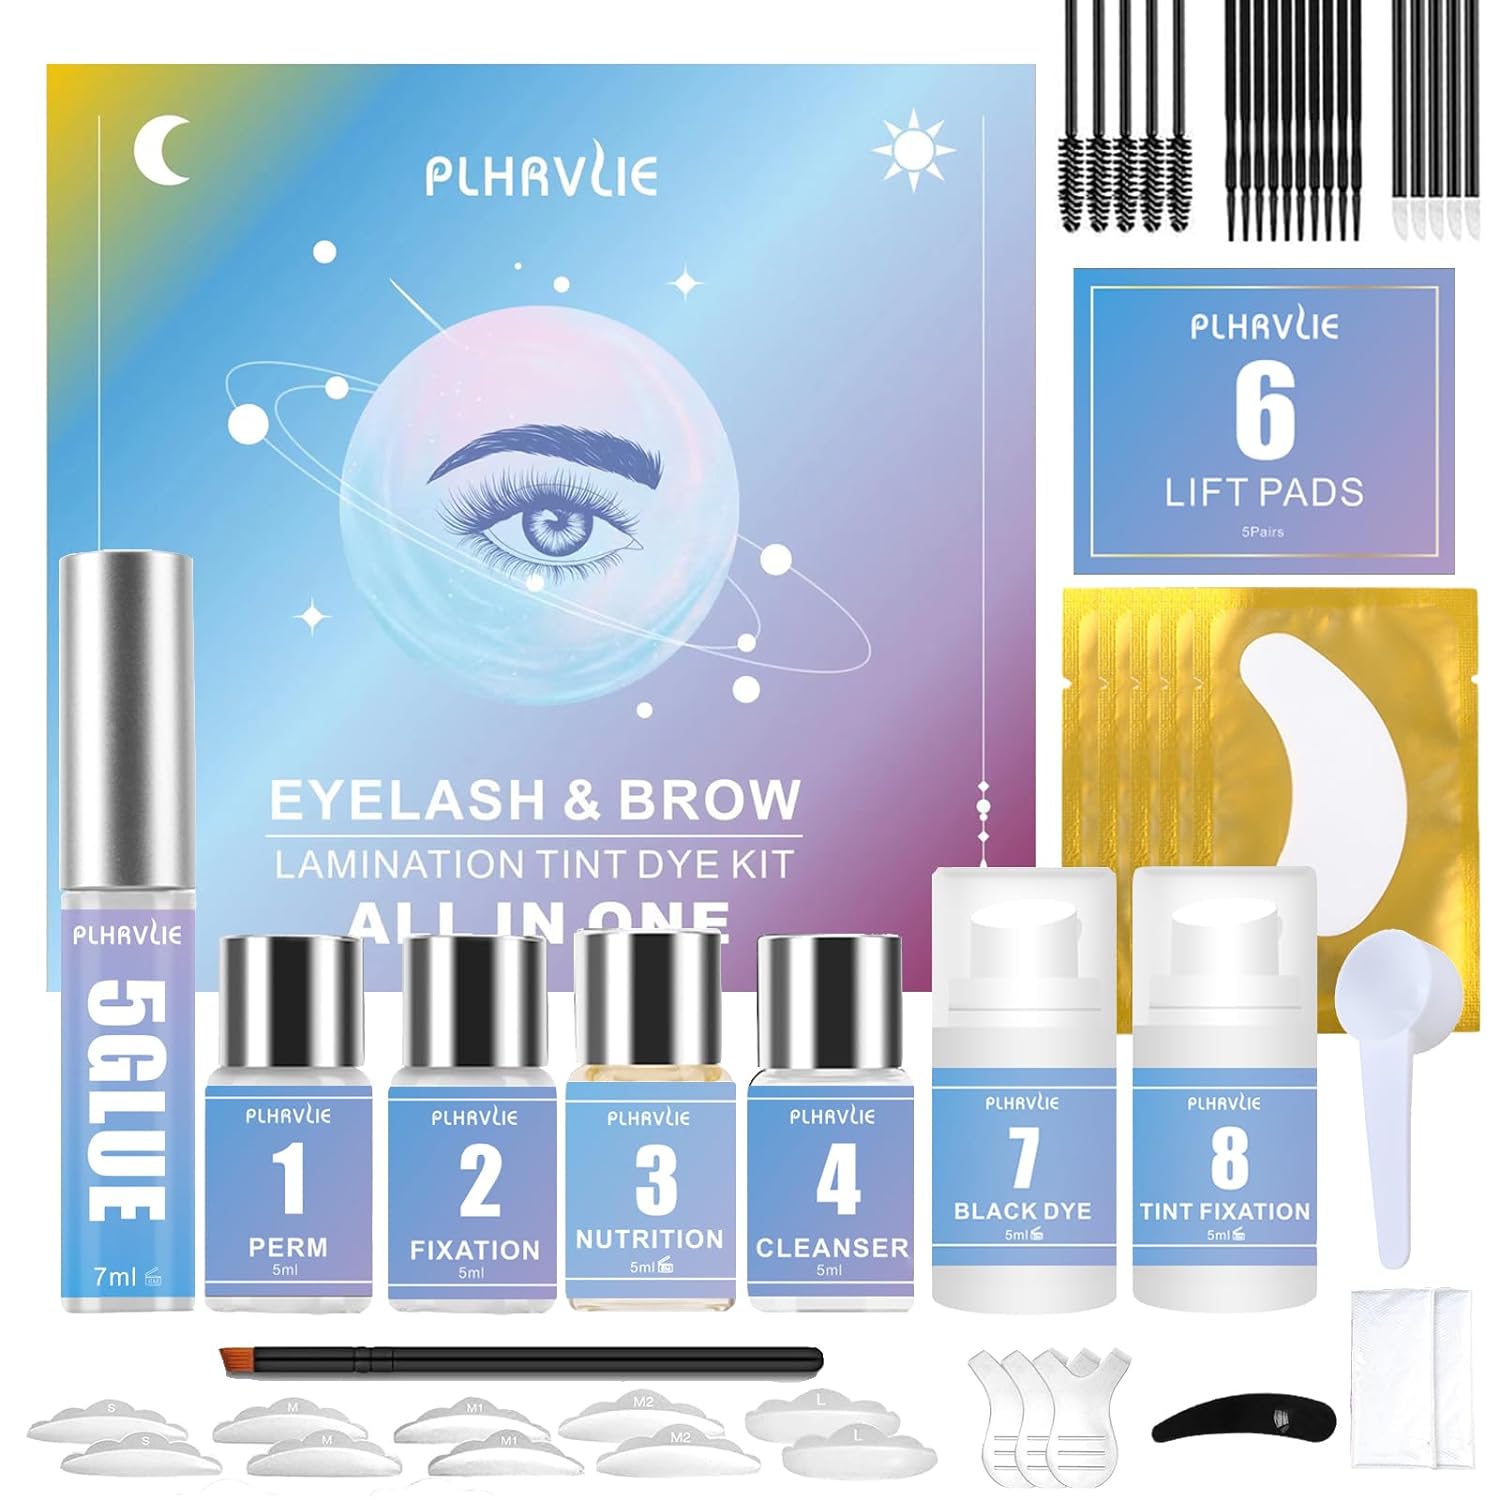 Loobexery Brow Lamination and Tint Kit, 4 in 1 Lash Lift Professional Eyebrow & Eyelash Perm Kit with Black Dye, Fuller Thicker Brows Long-lasting for 6-8 Weeks, Suitable Salon Home Use